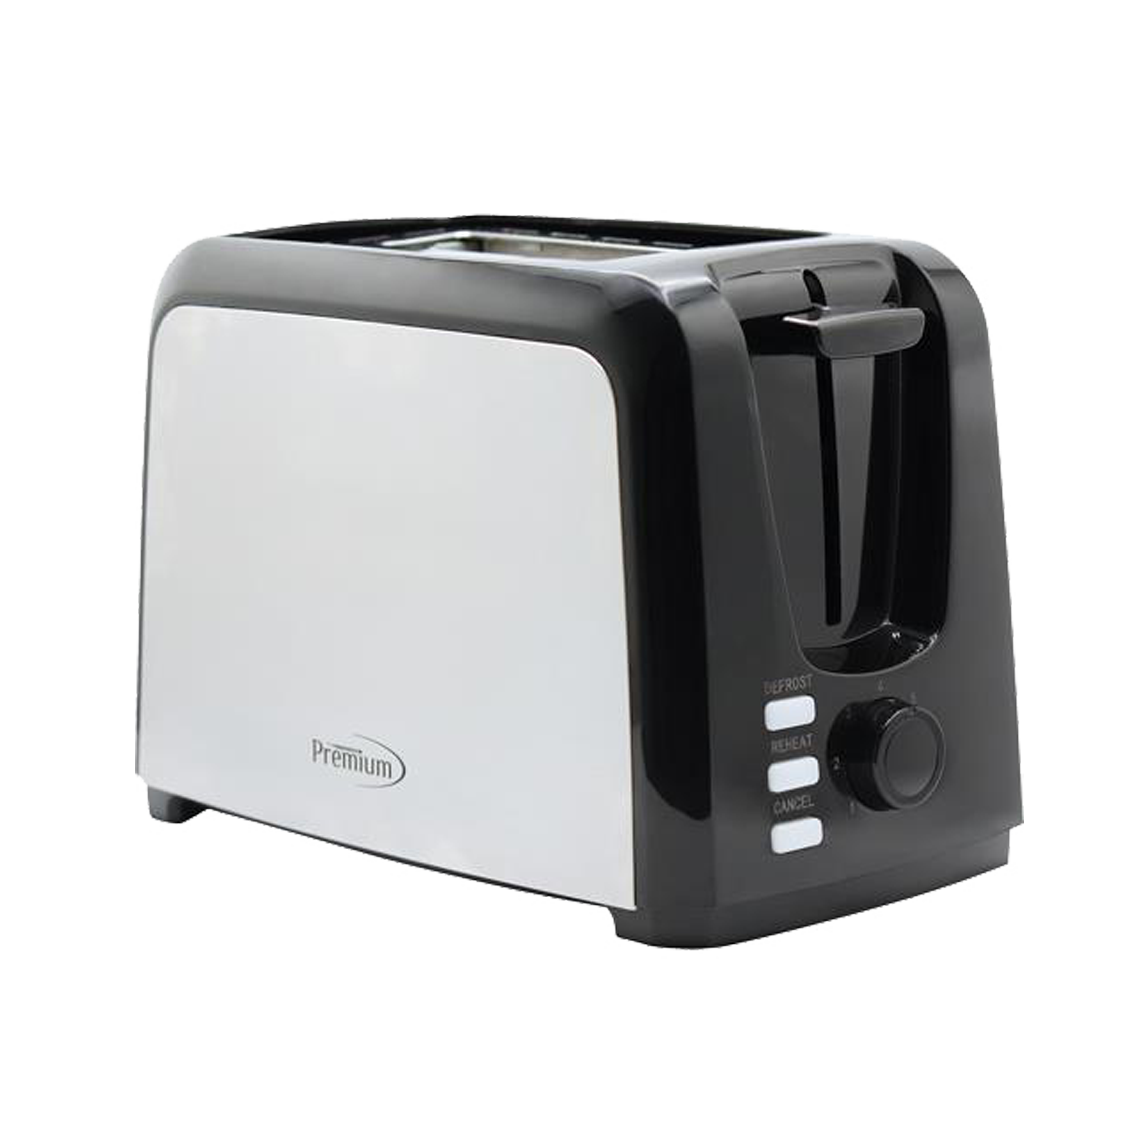 Premium 2 Slice Wide Slot Stainless steel Toaster With 7 Toasting 750 Watts.